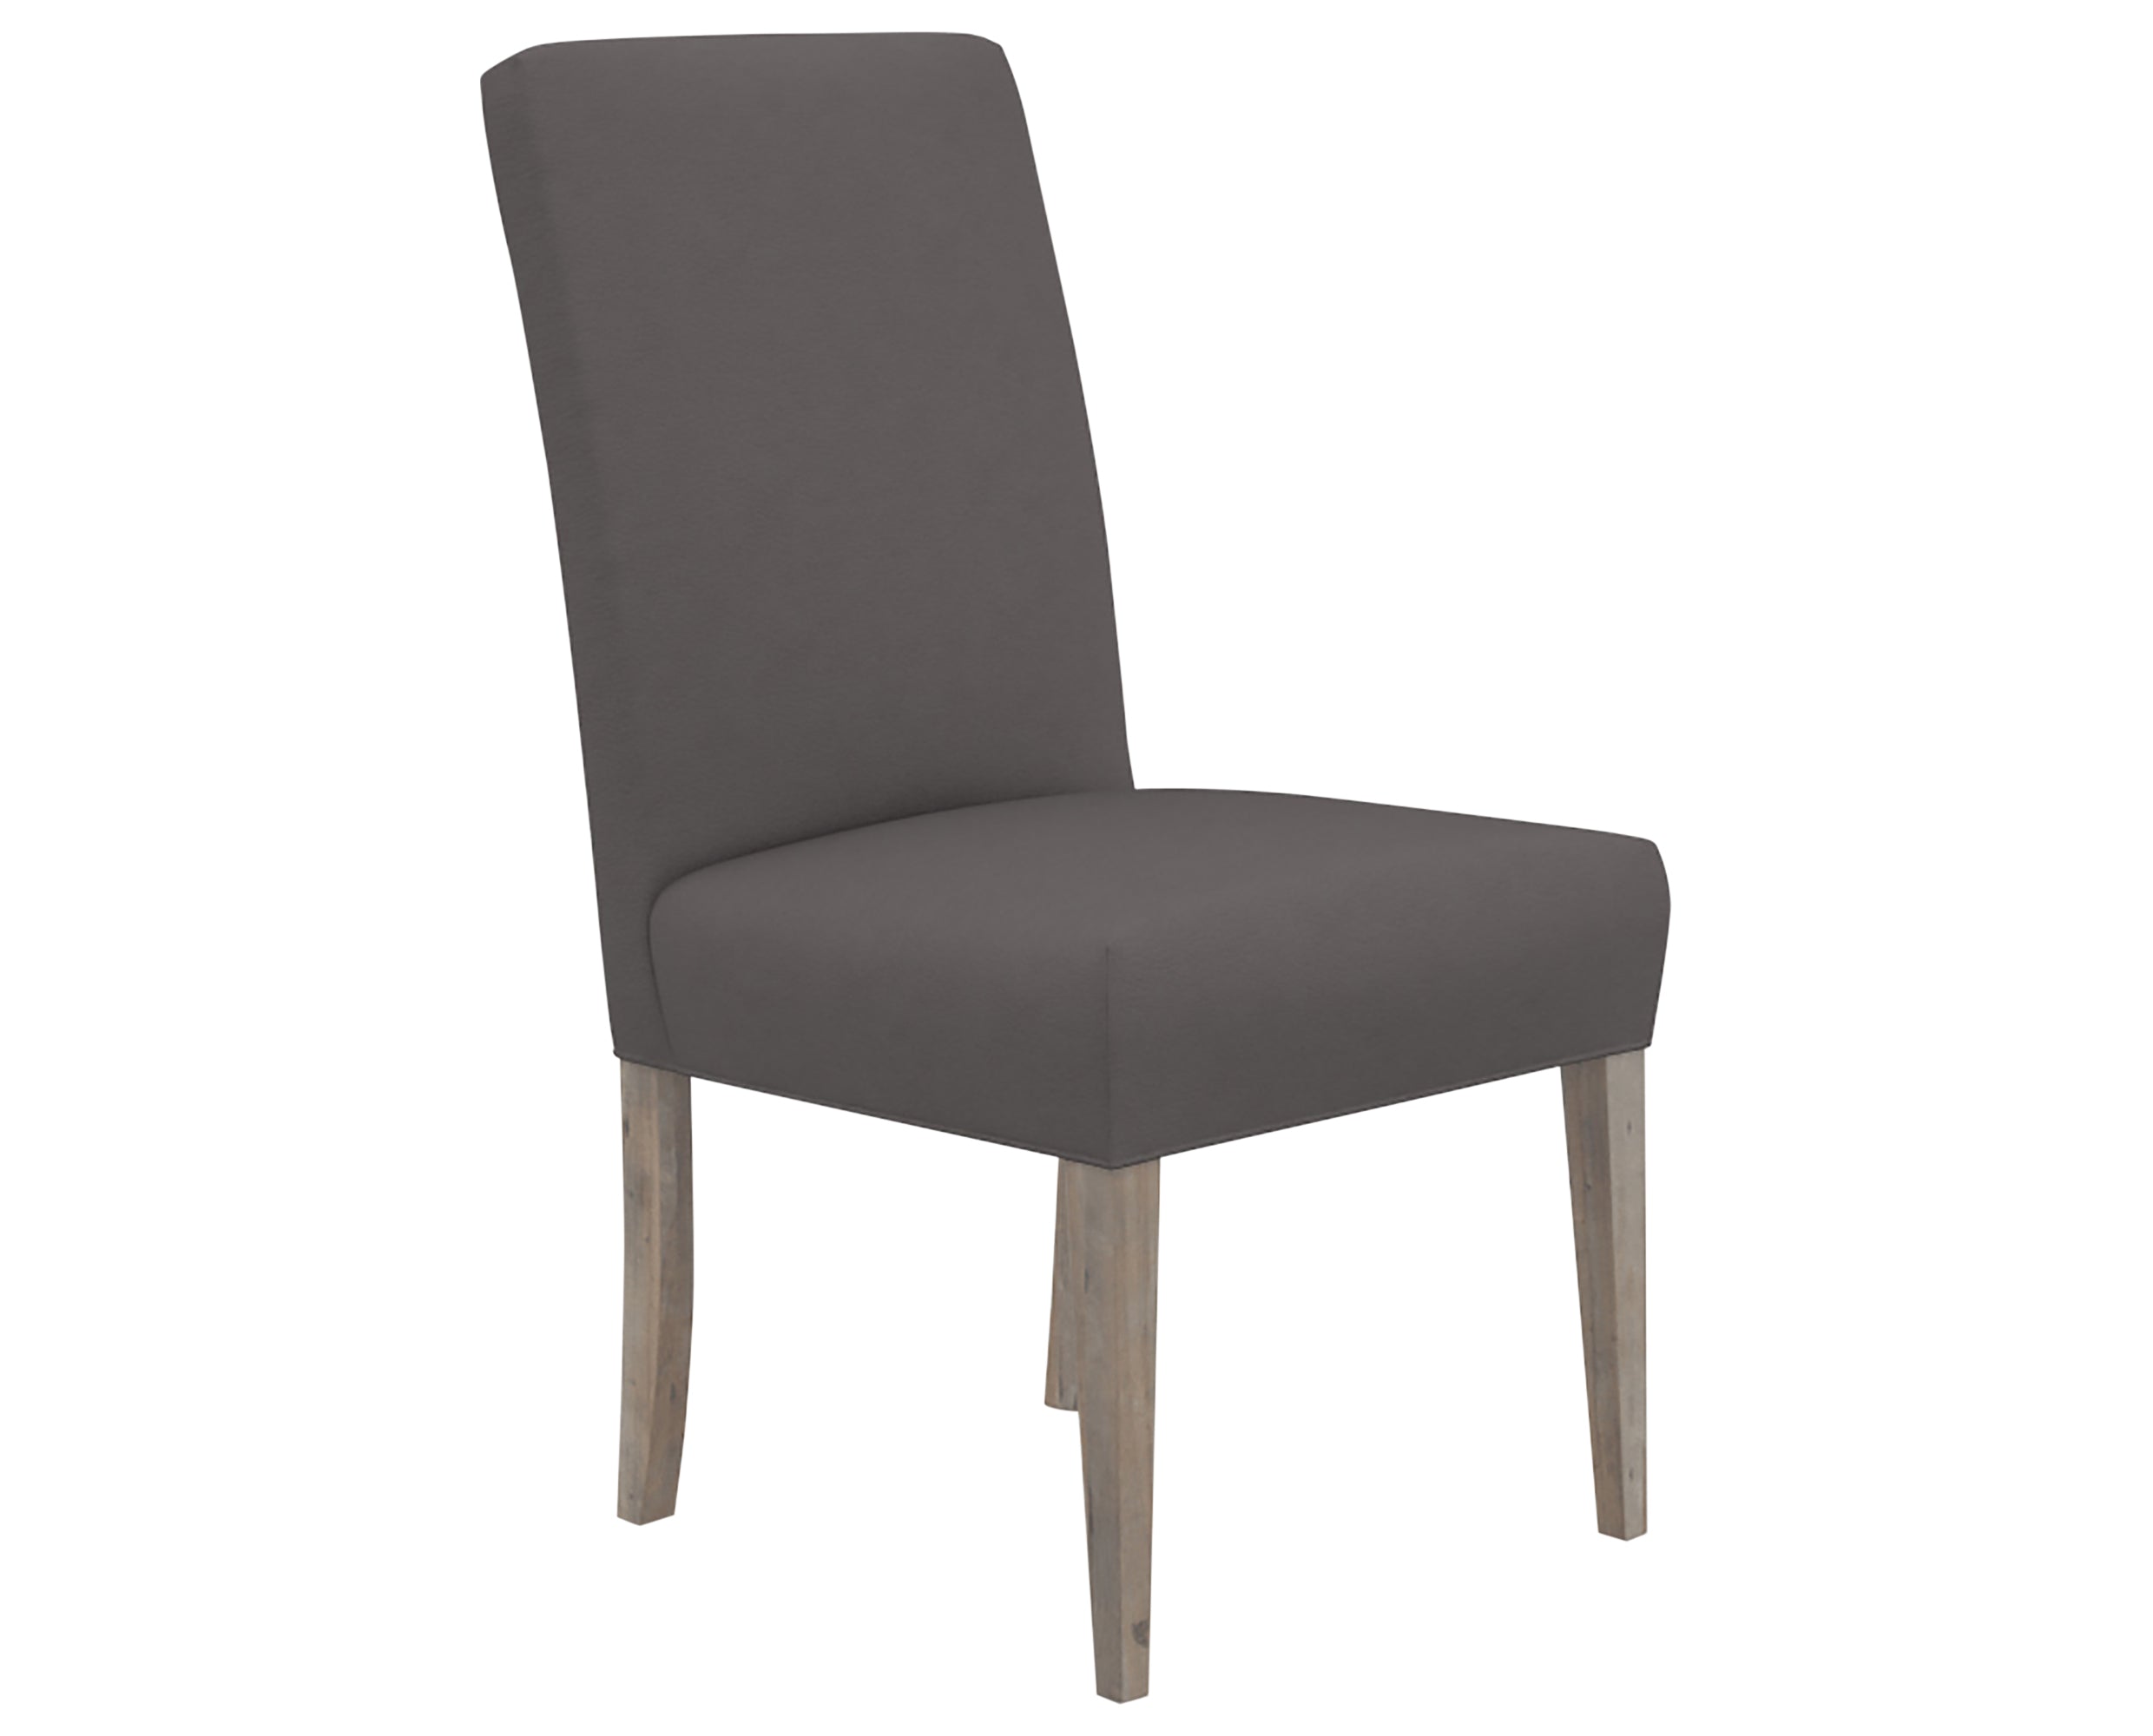 Shadow &amp; Faux Leather XU | Canadel Loft Dining Chair 5050 | Valley Ridge Furniture